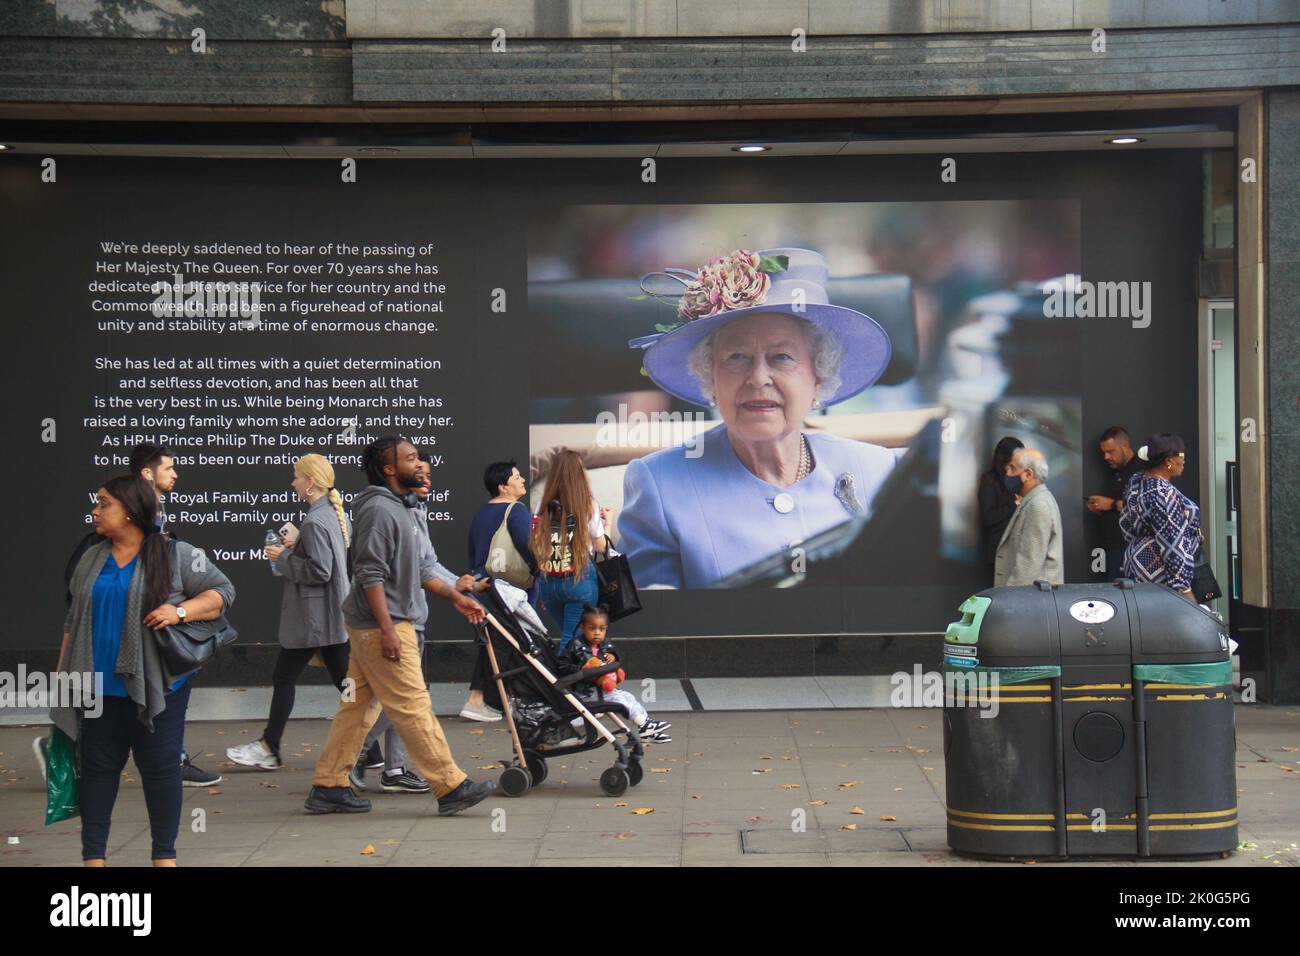 Pedestrians walk past a billboard on Oxford street in memory of Queen Elizabeth ll. Queen Elizabeth II was queen regnant of 32 sovereign states during her lifetime, 15 at the time of her death. Her reign of 70 years and 214 days was the longest of any British monarch and the longest recorded of any female head of state in history. Stock Photo